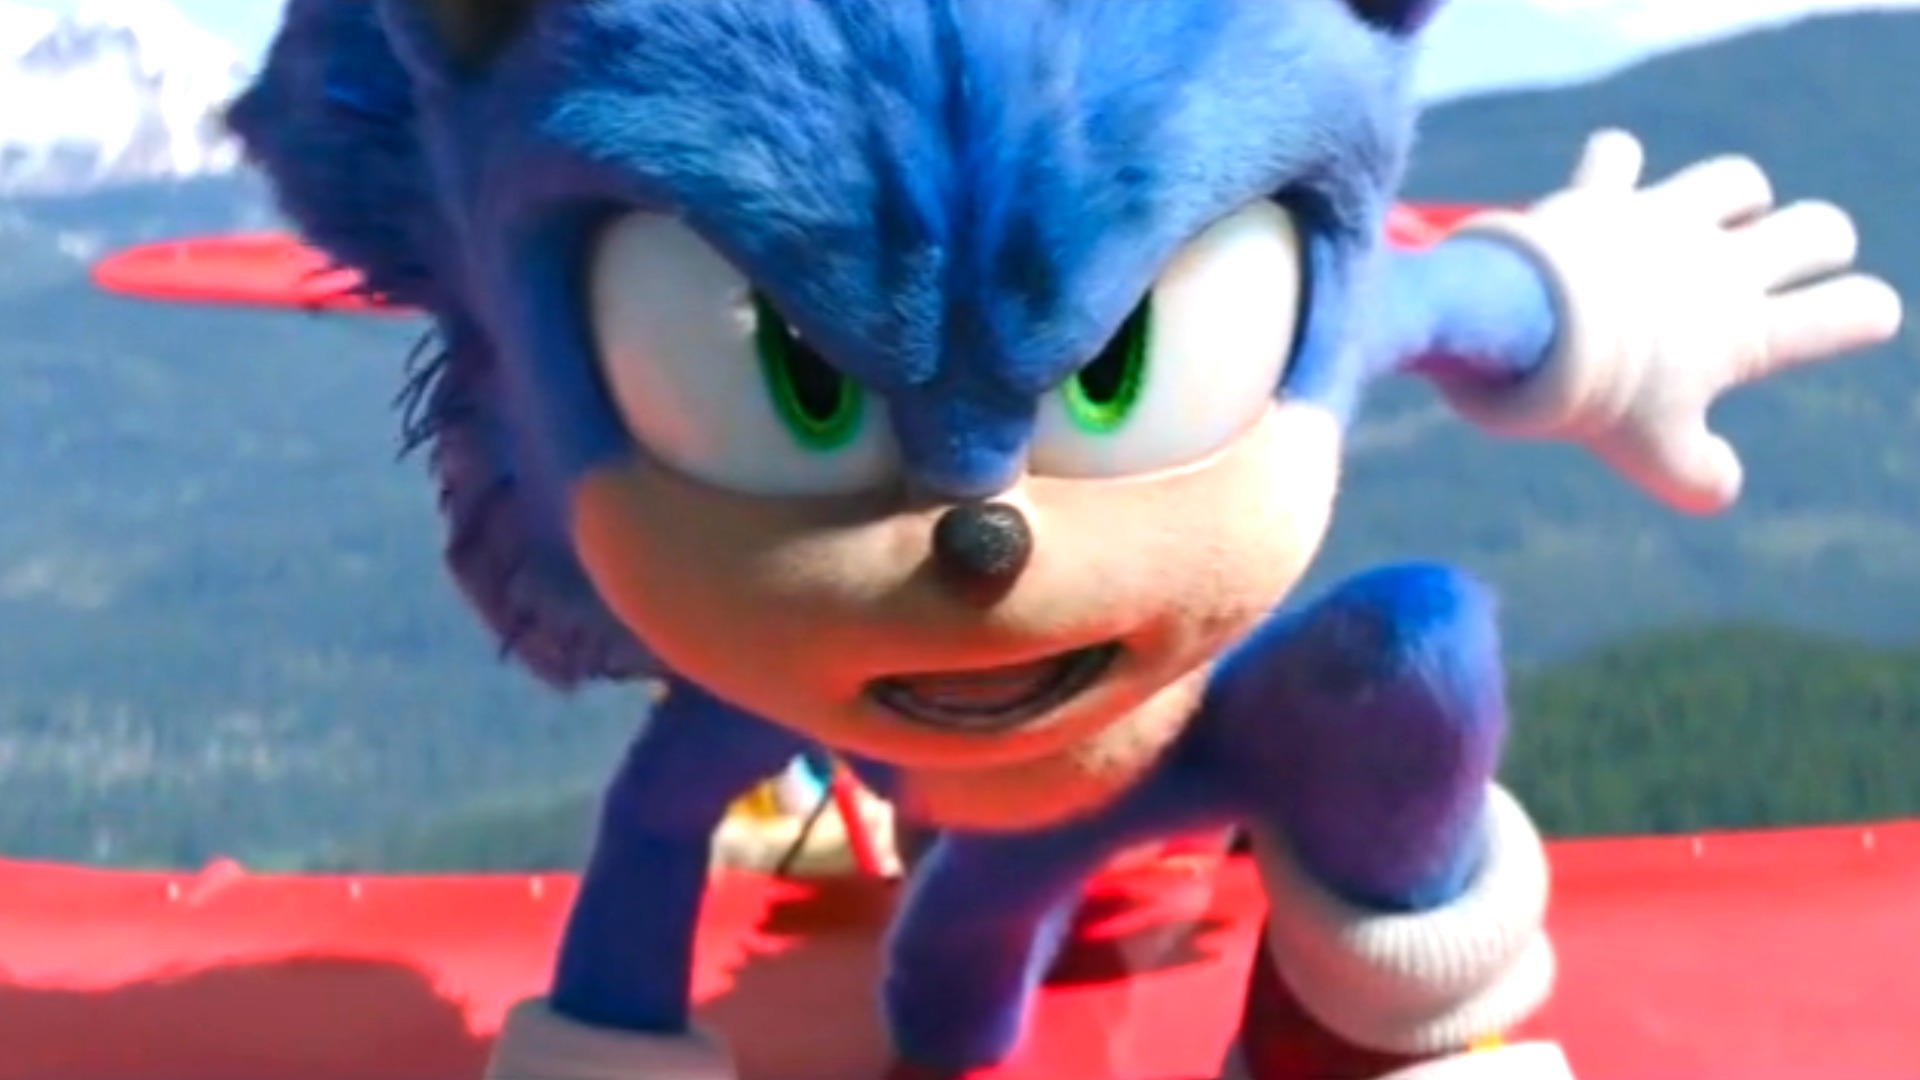 Sonic the Hedgehog 2: Extended Preview - Trailers & Videos